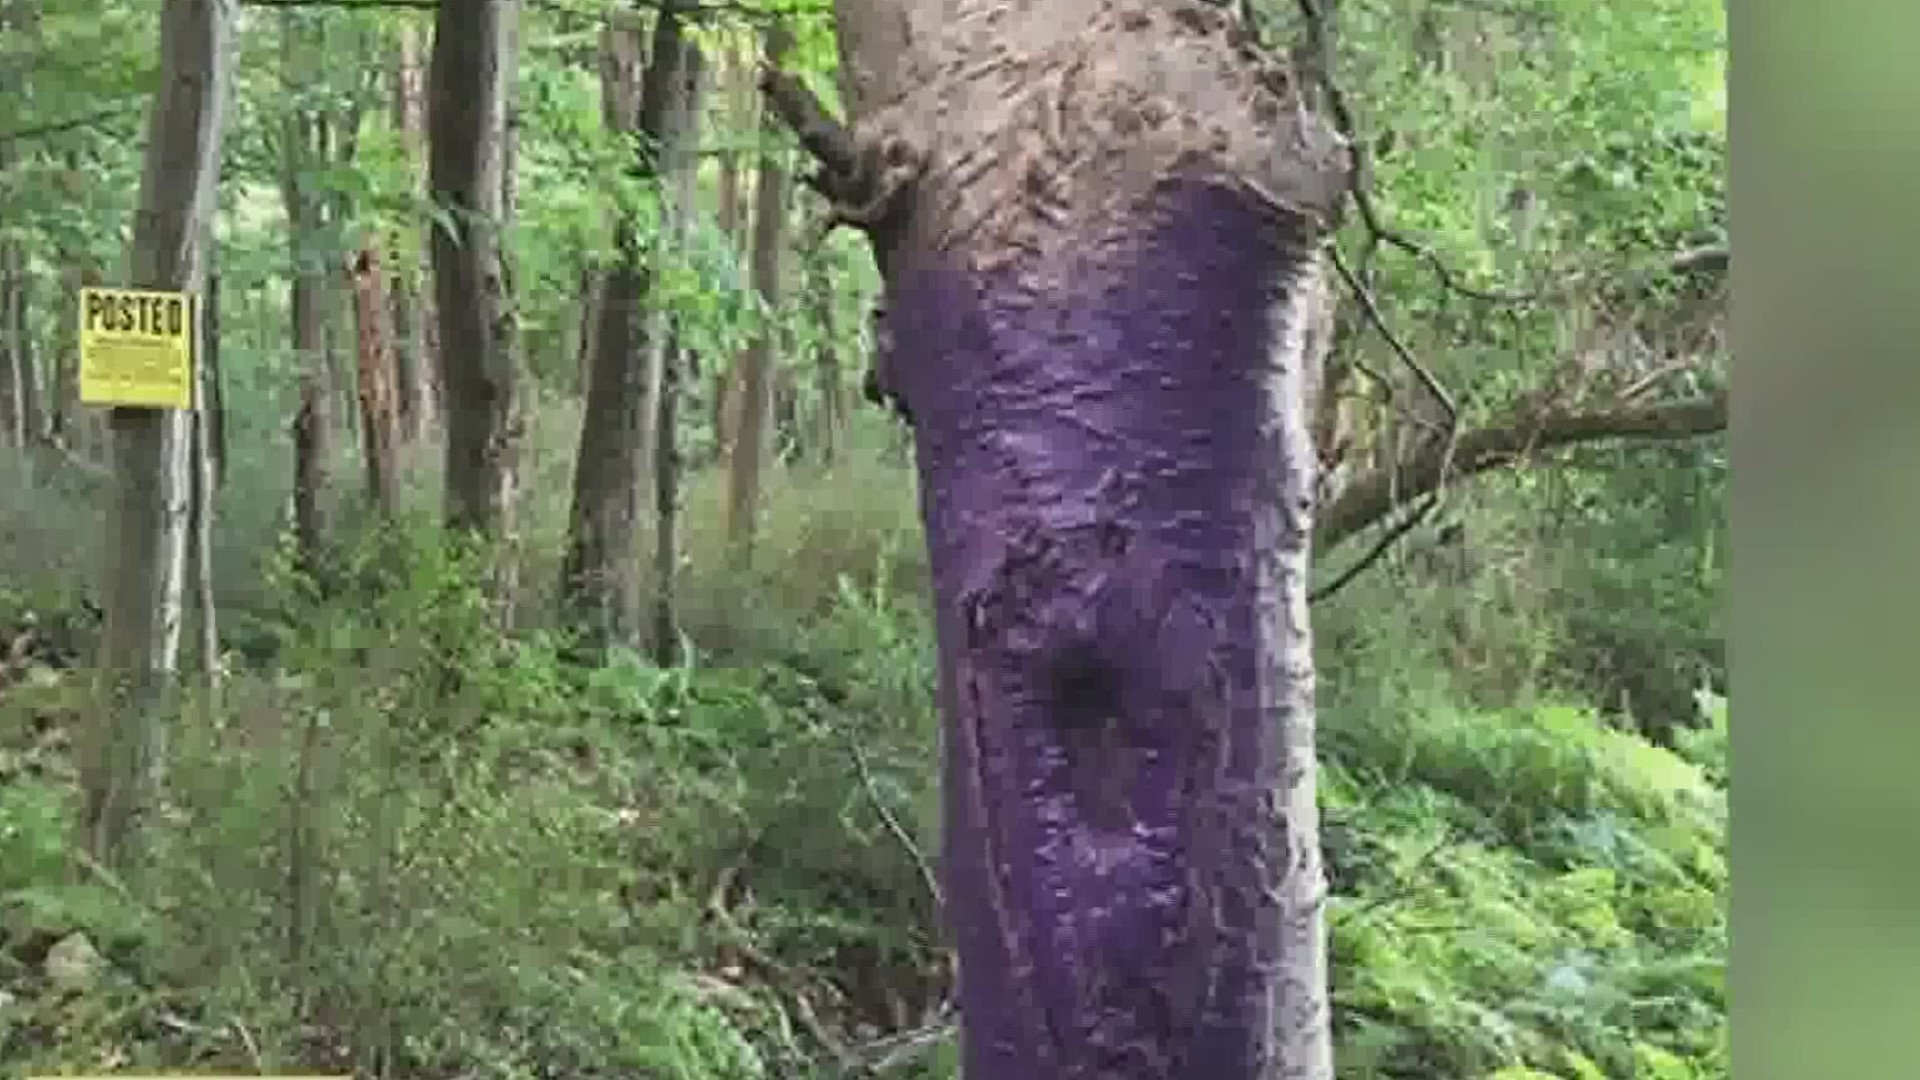 Instead of the "no trespassing" signs we are all used to, landowners can now mark trees or posts with purple paint.